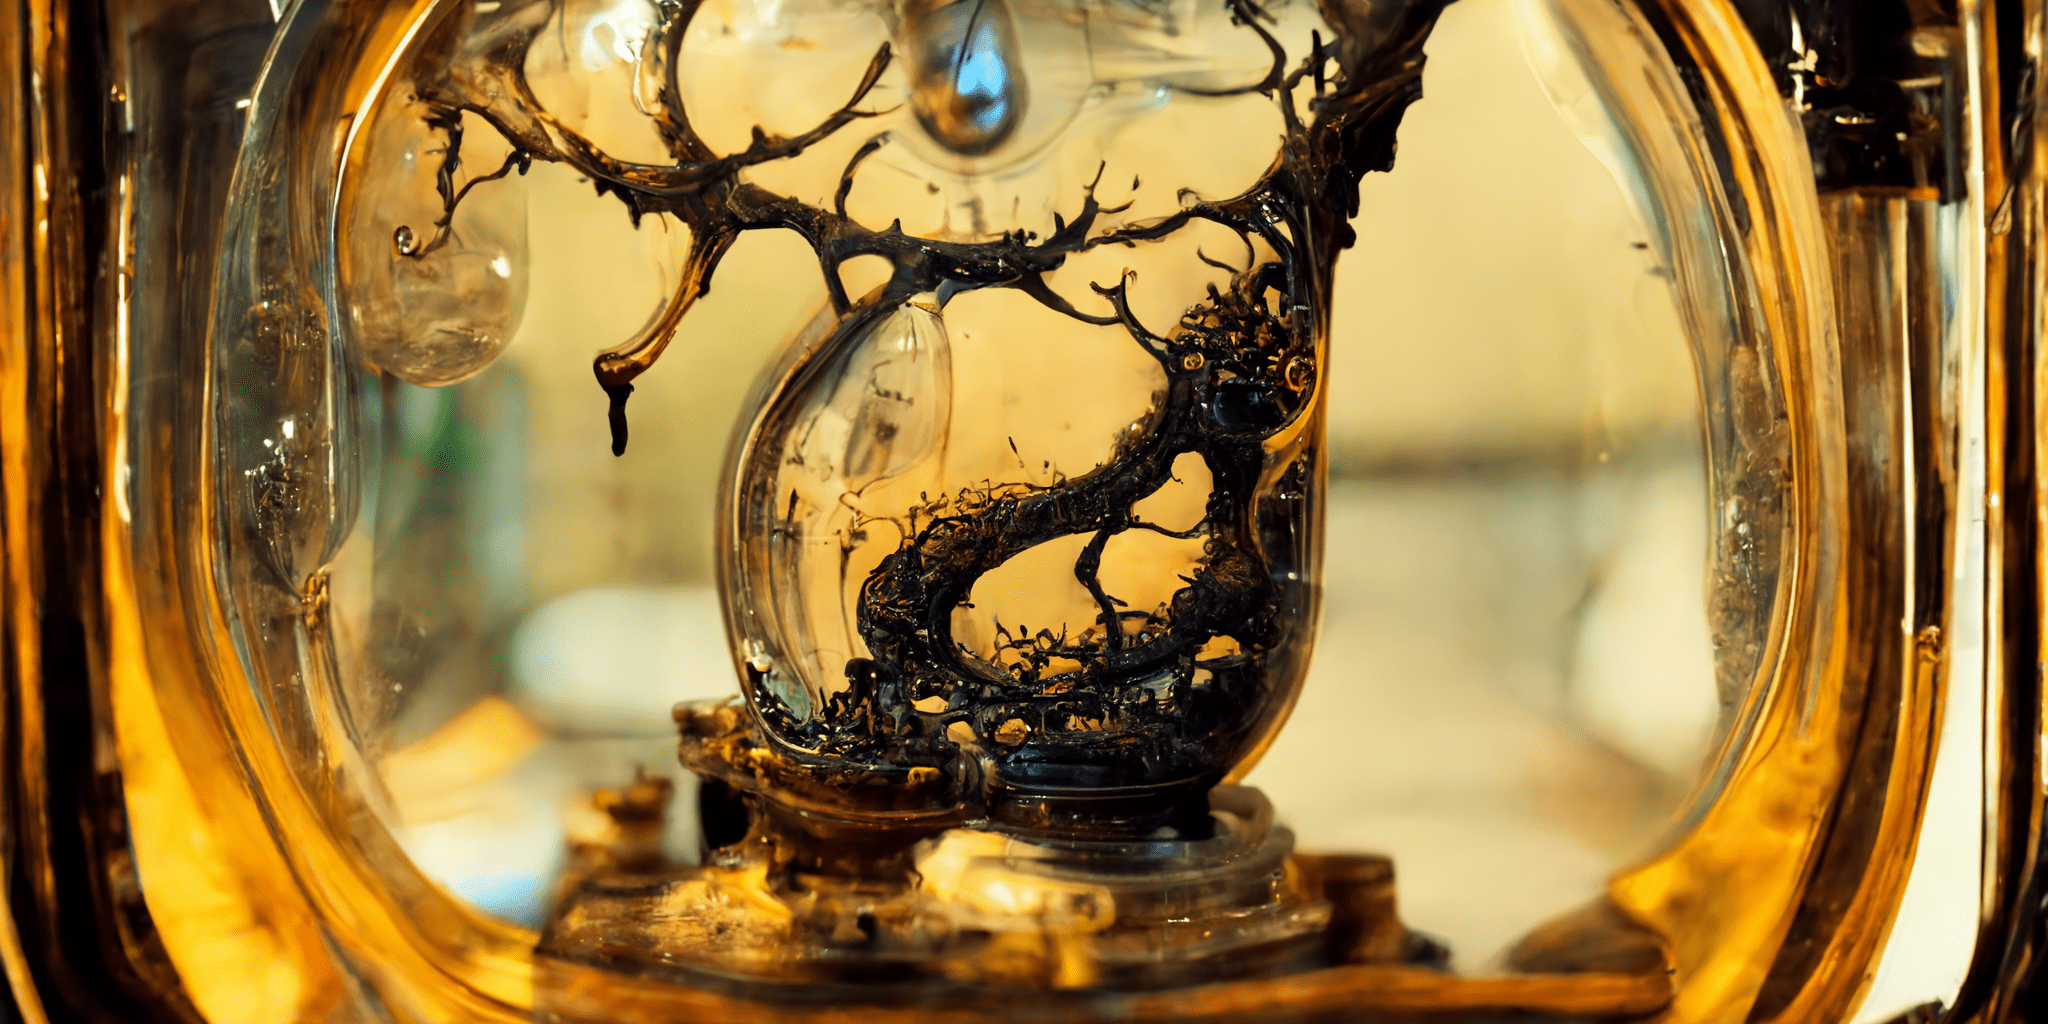 In an hourglass I cannot turn upside down – glasspockets